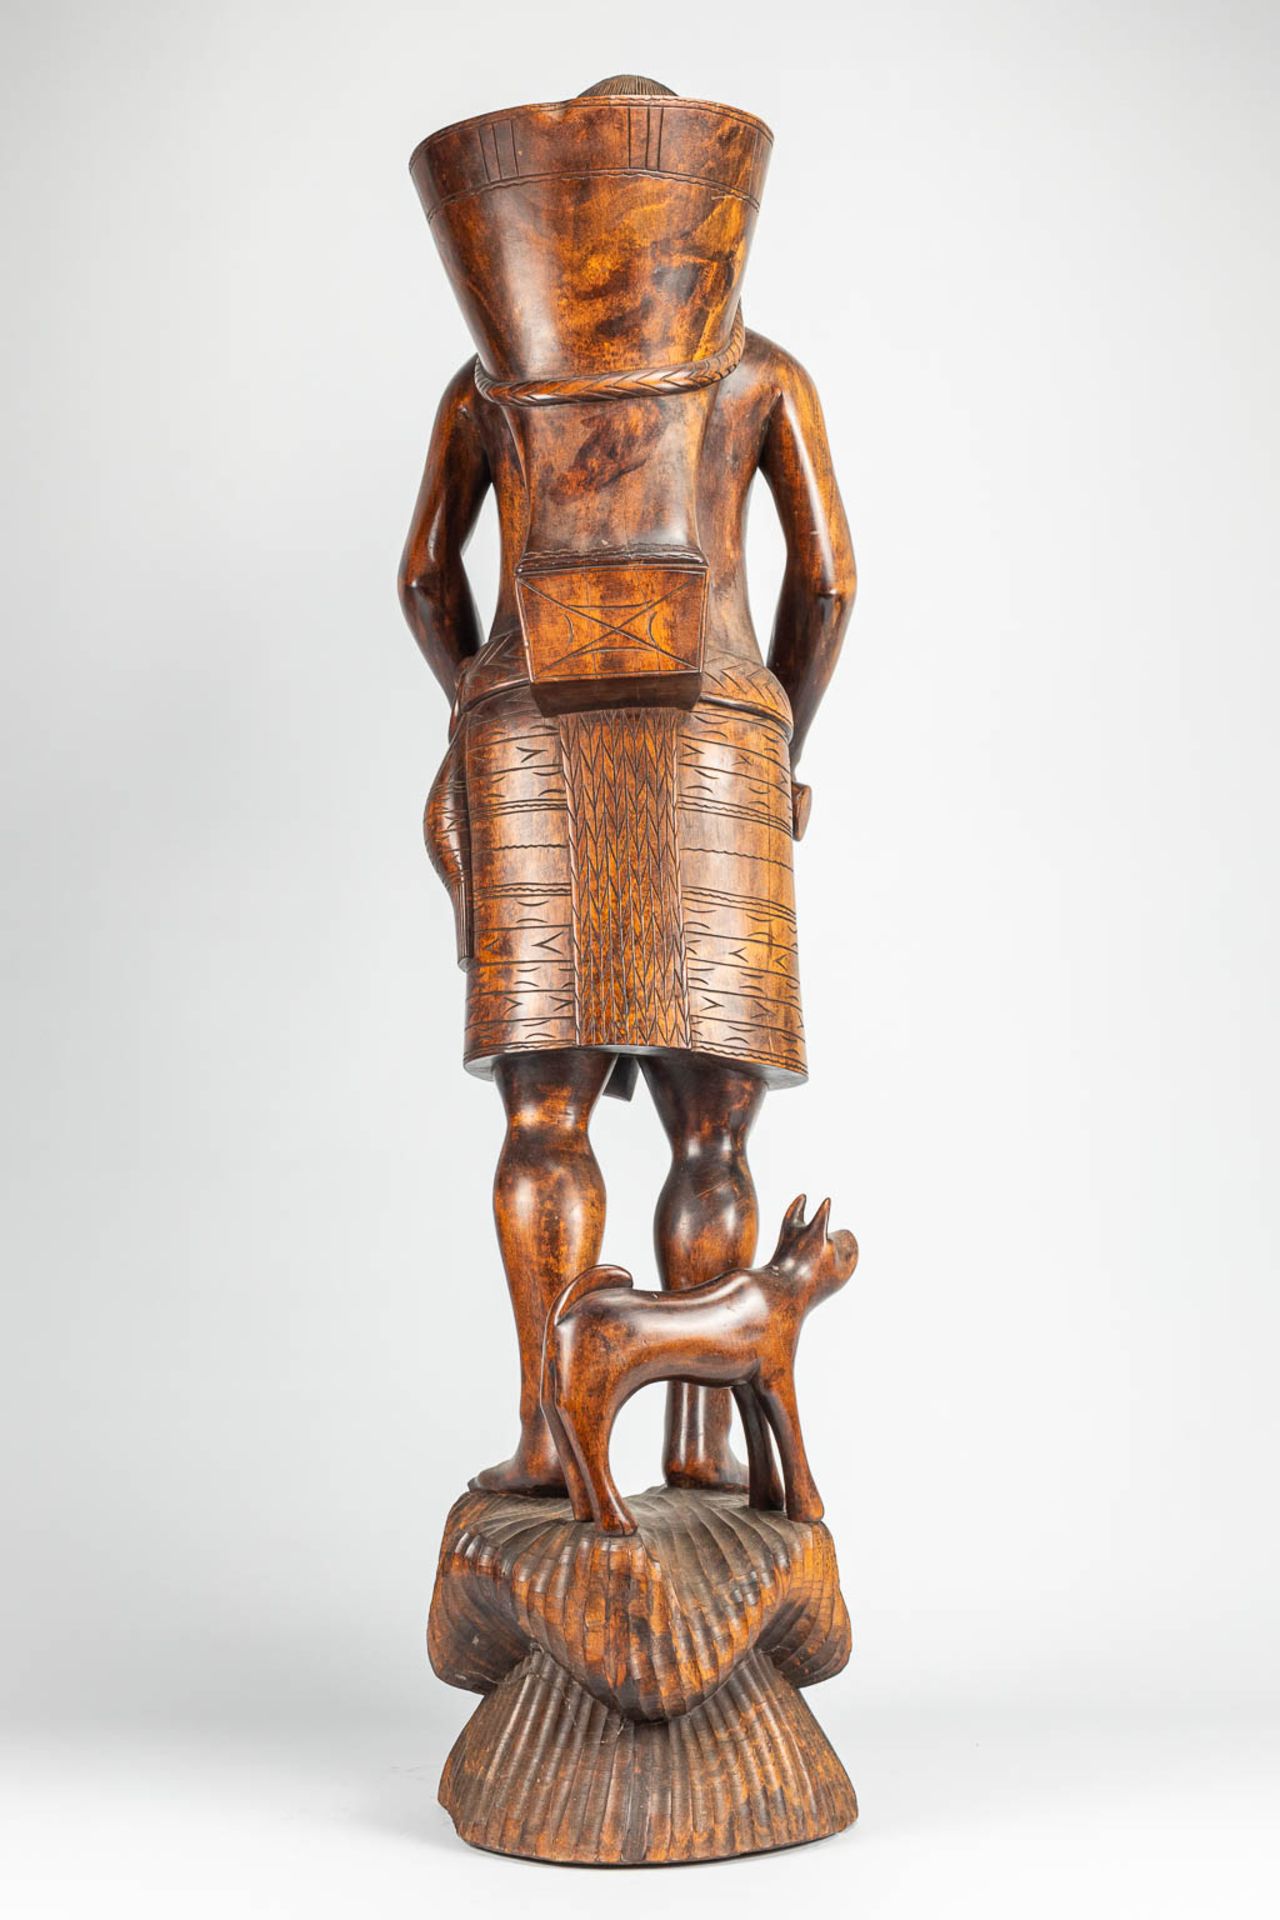 A large statue of an African woman, made of sculptured wood. - Image 7 of 8